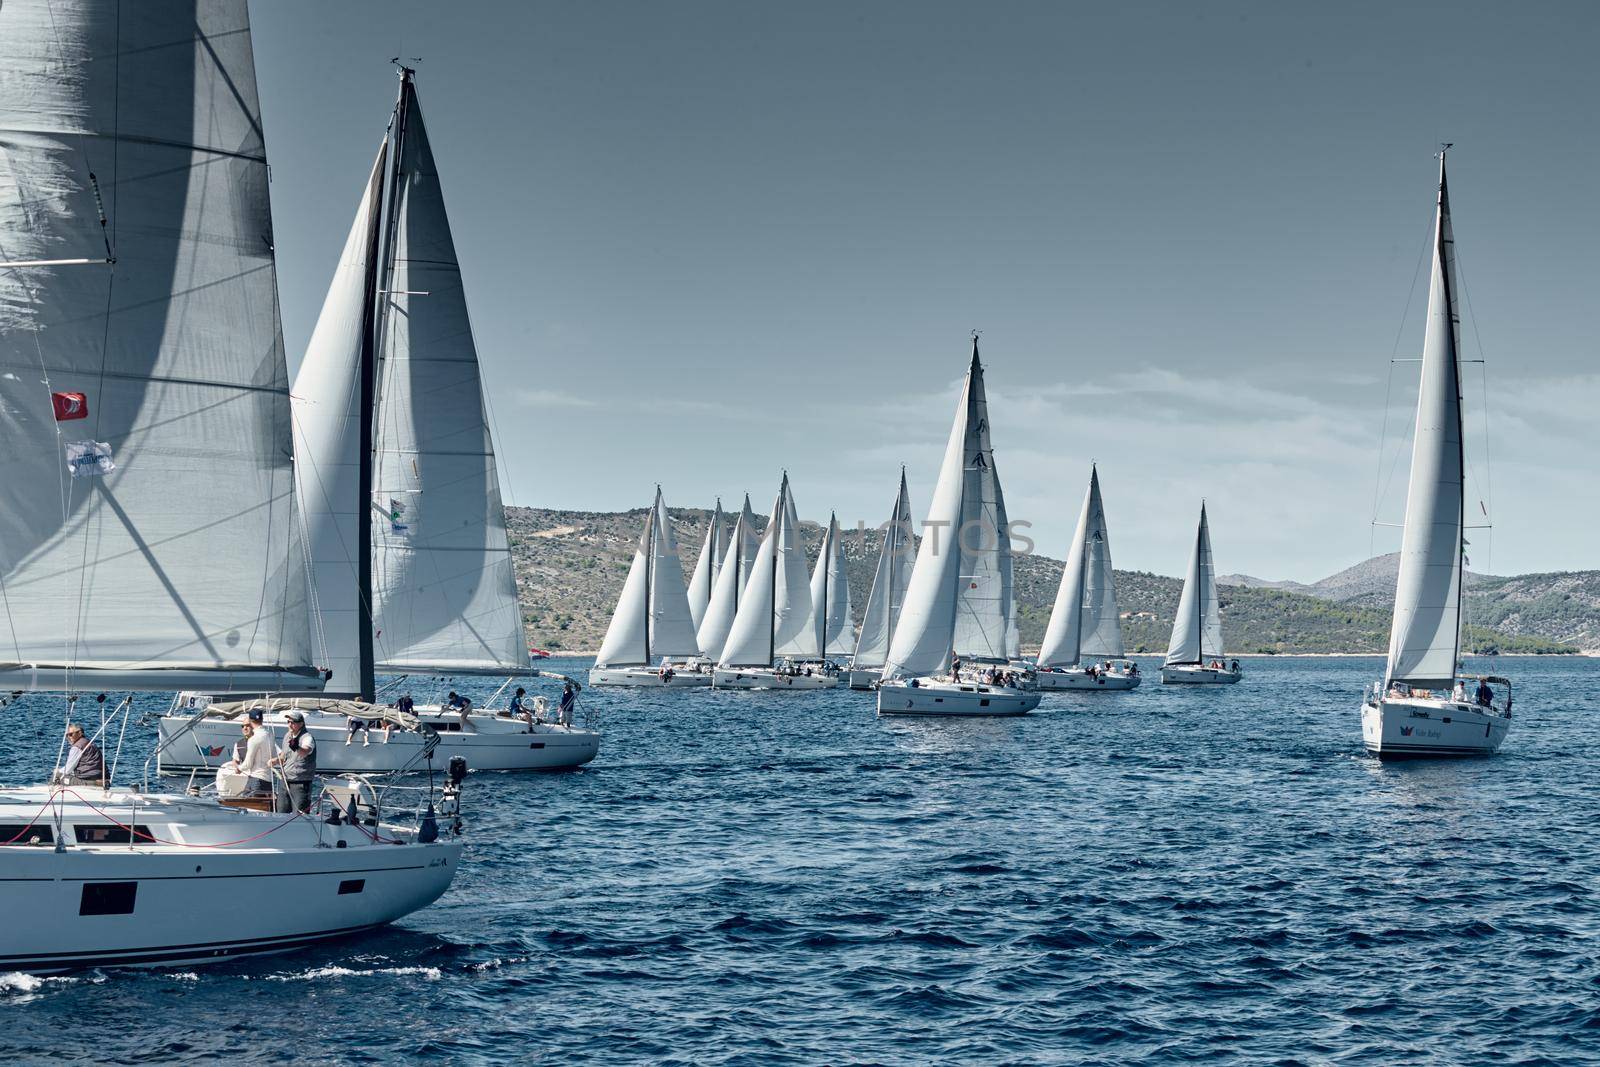 Croatia, Adriatic Sea, 18 September 2019: Sailboats compete in a sail regatta, sailboat race, reflection of sails on water, number of boat is on aft boats, island is on background, clear weather by vladimirdrozdin